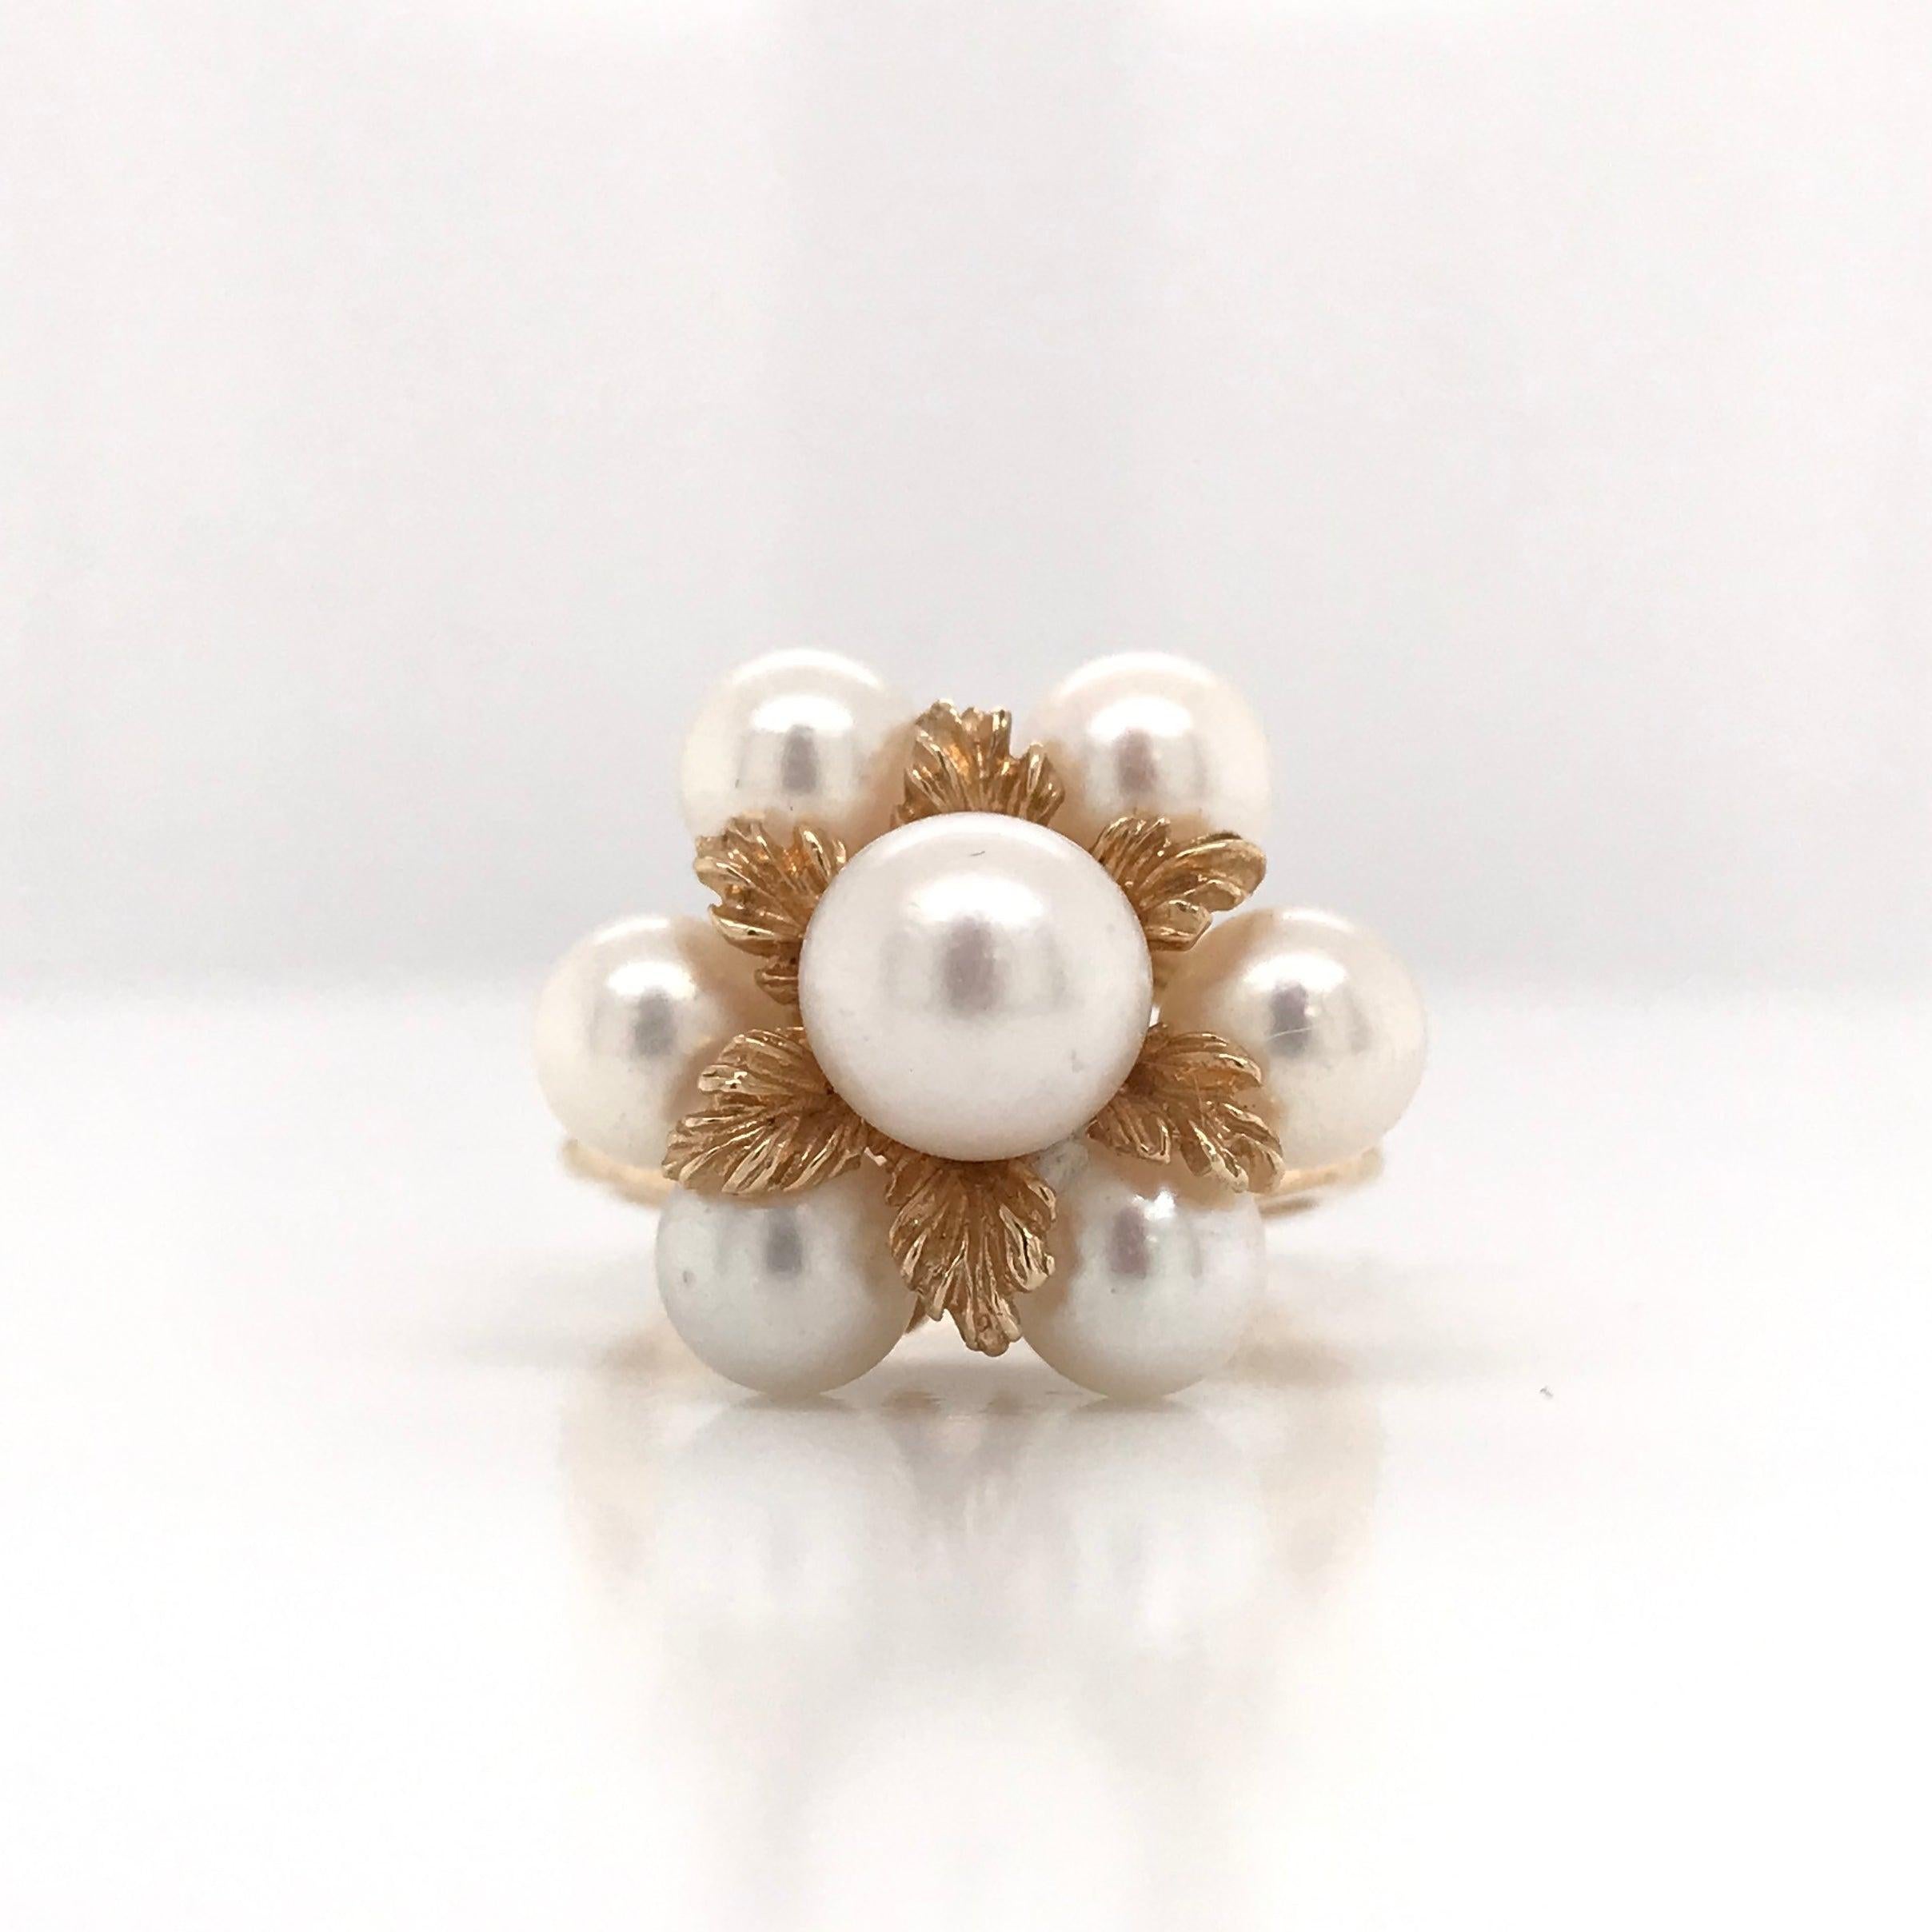 This piece was crafted sometime during the Mid Century design period ( 1940-1960s ). This charming Mid Century piece features 7 beautiful cream colored pearls with a slight blush. The pearls have a good luster and good complexion. The 14k yellow